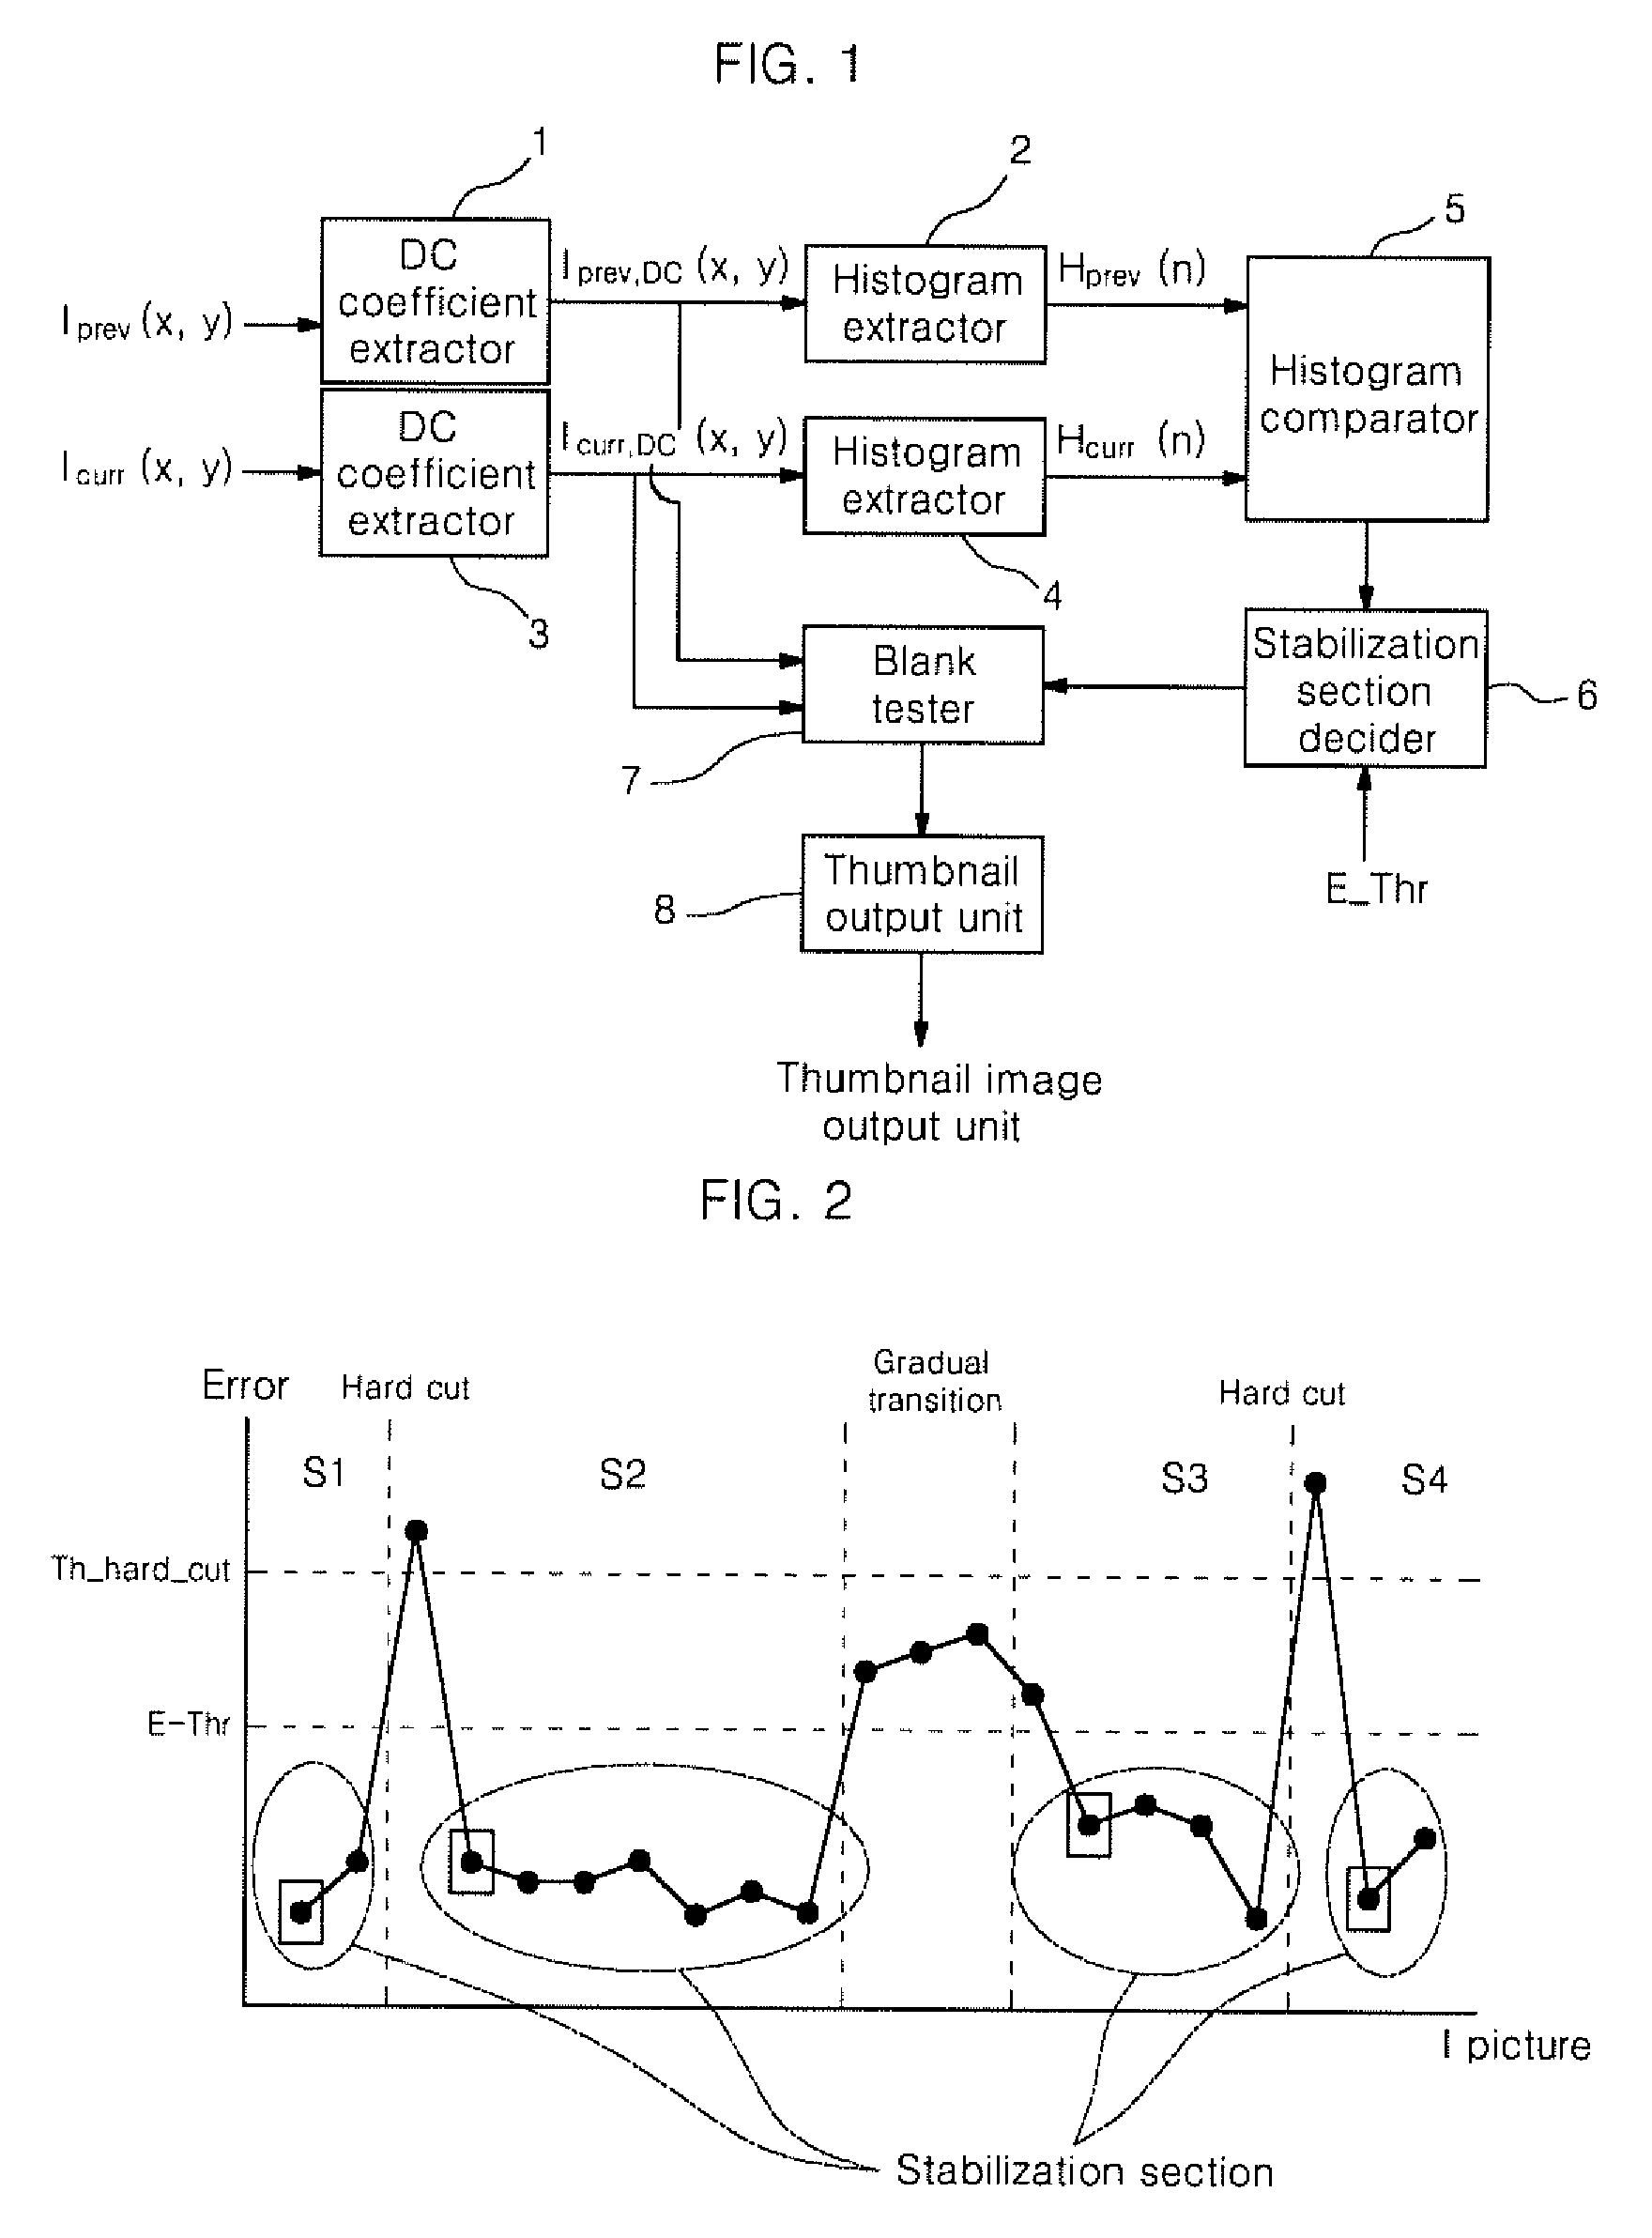 Apparatus and method for generating thumbnail images